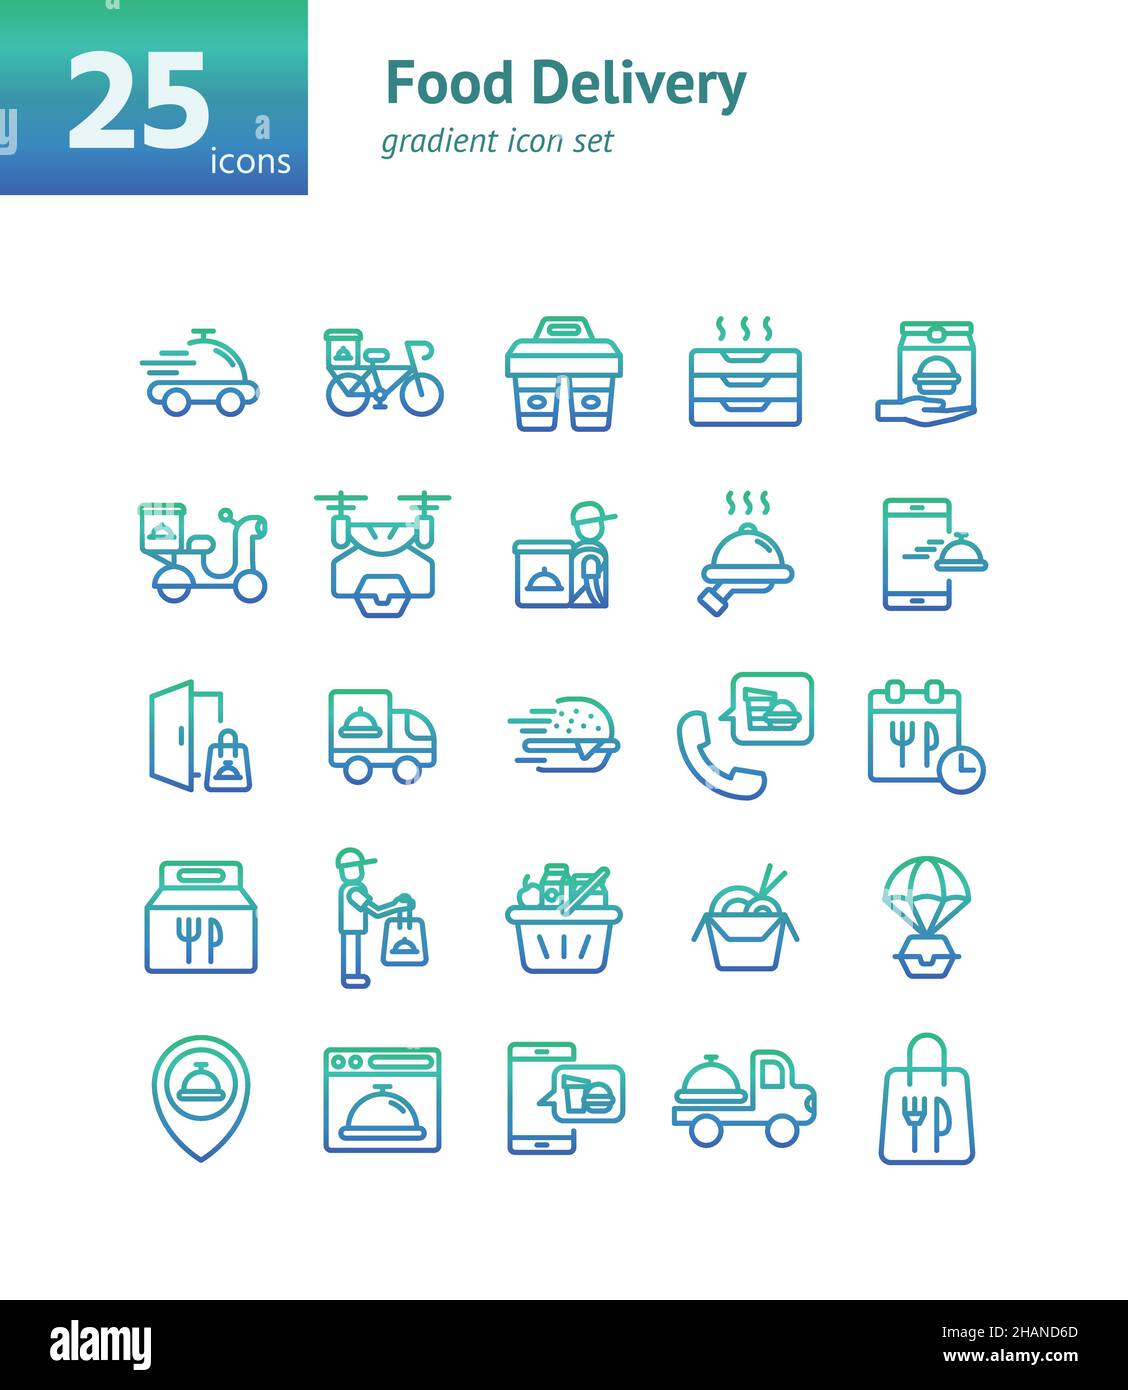 Food Delivery gradient icon set. Vector and Illustration. Stock Vector